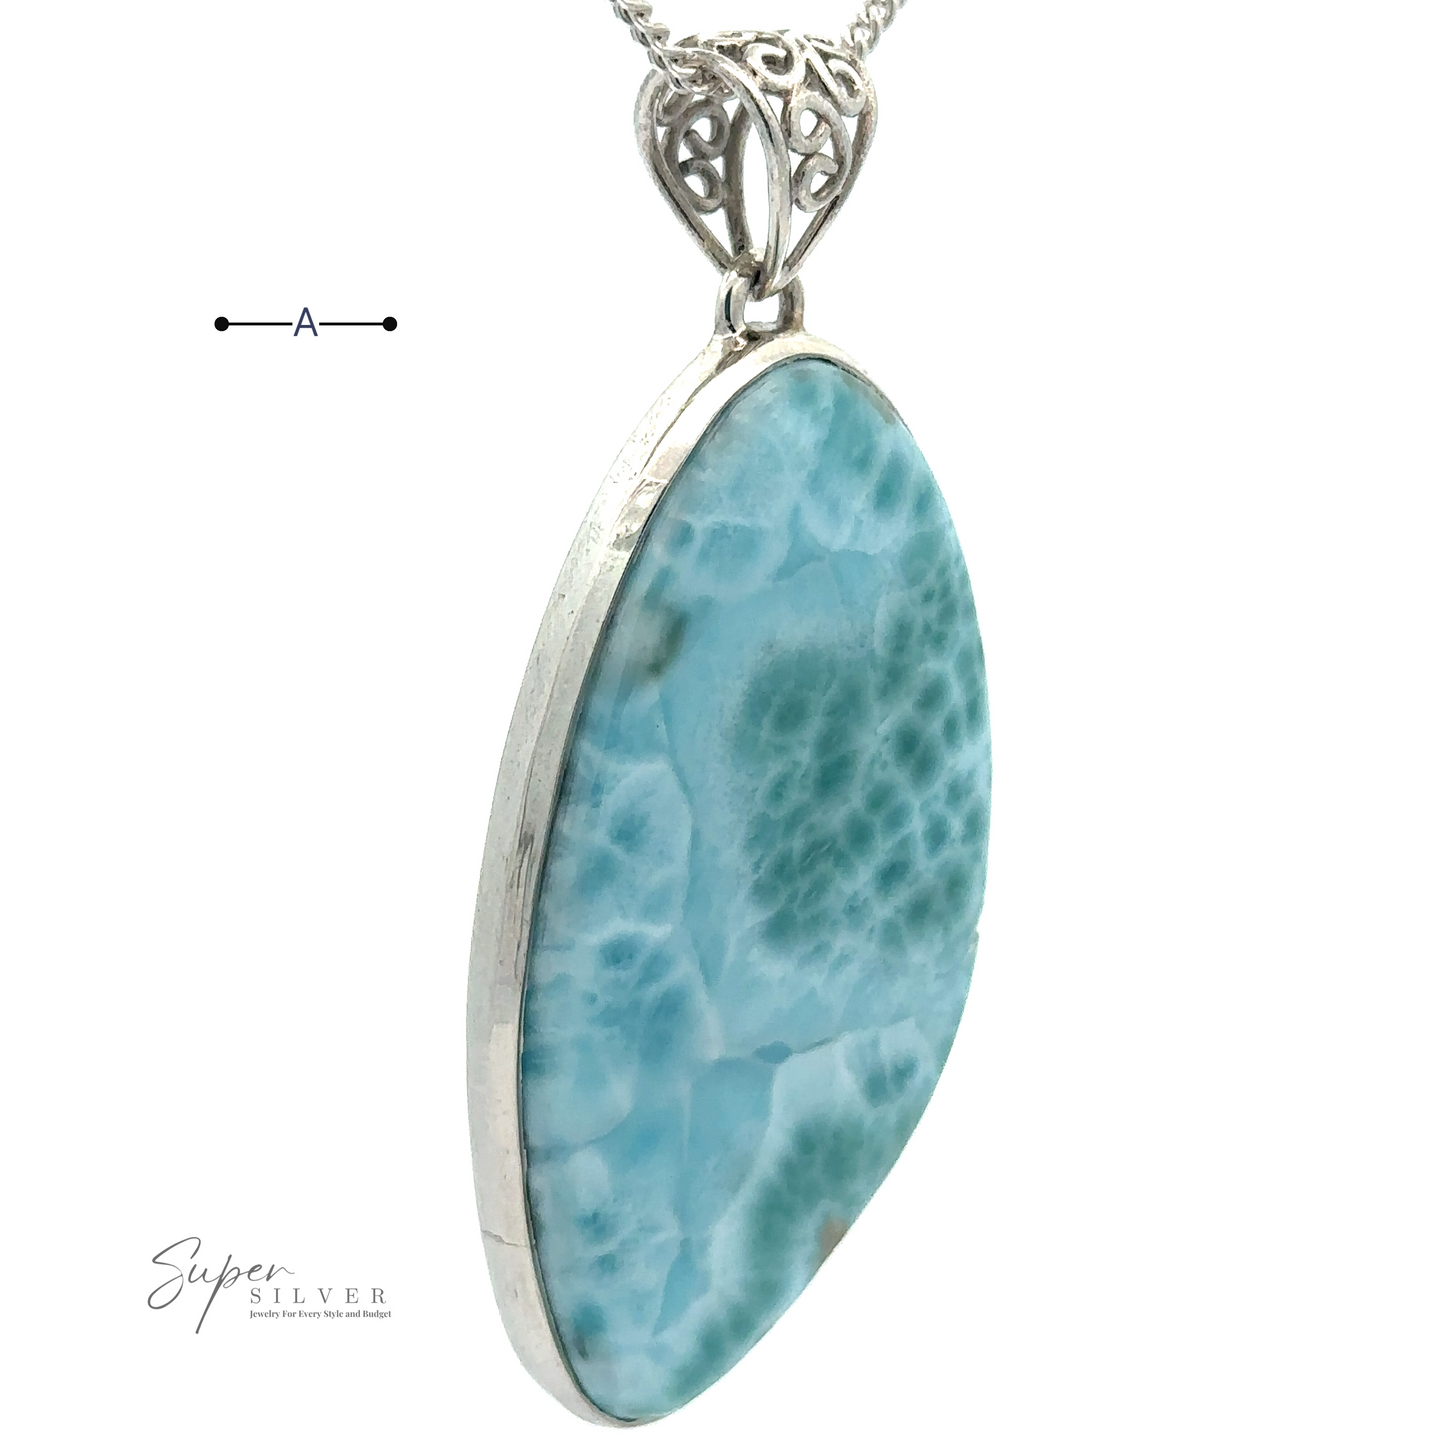 
                  
                    An oval-shaped blue stone pendant with a silver border and ornate silver bail, made of .925 Sterling Silver, hanging from a chain with a "Freeform Large Larimar Pendant" logo at the bottom left.
                  
                